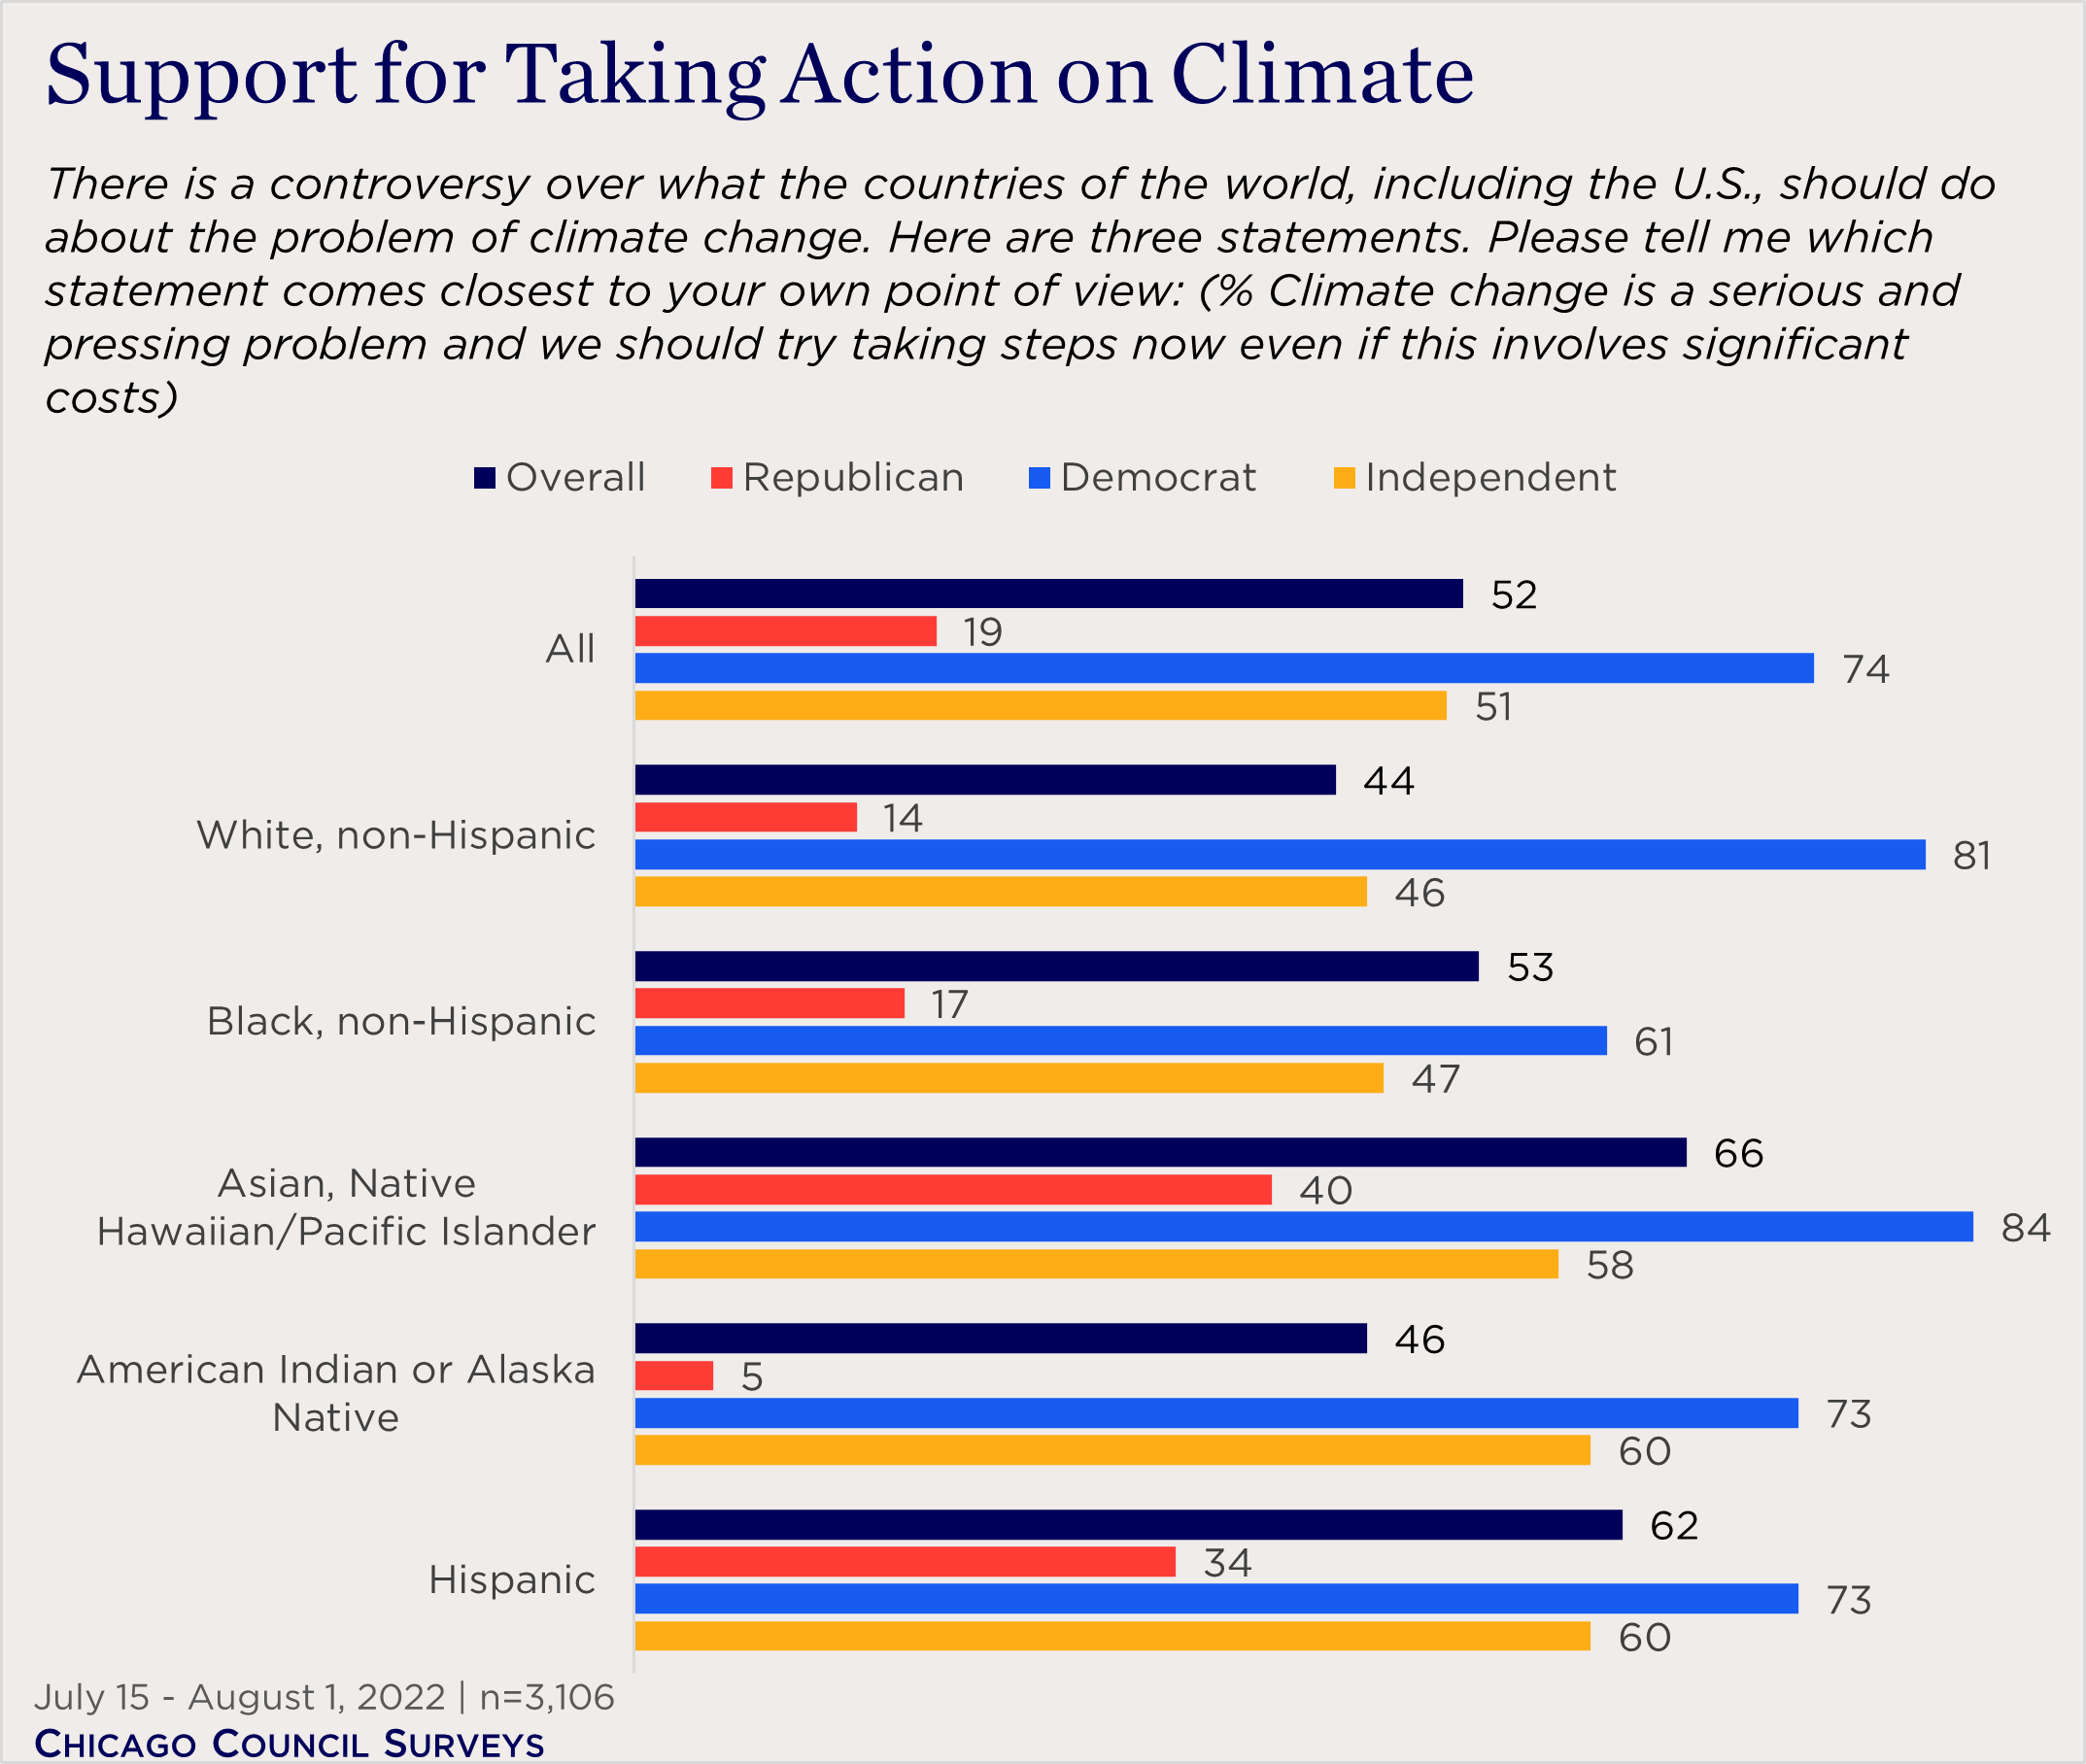 "bar chart showing support for climate change action by race and party"